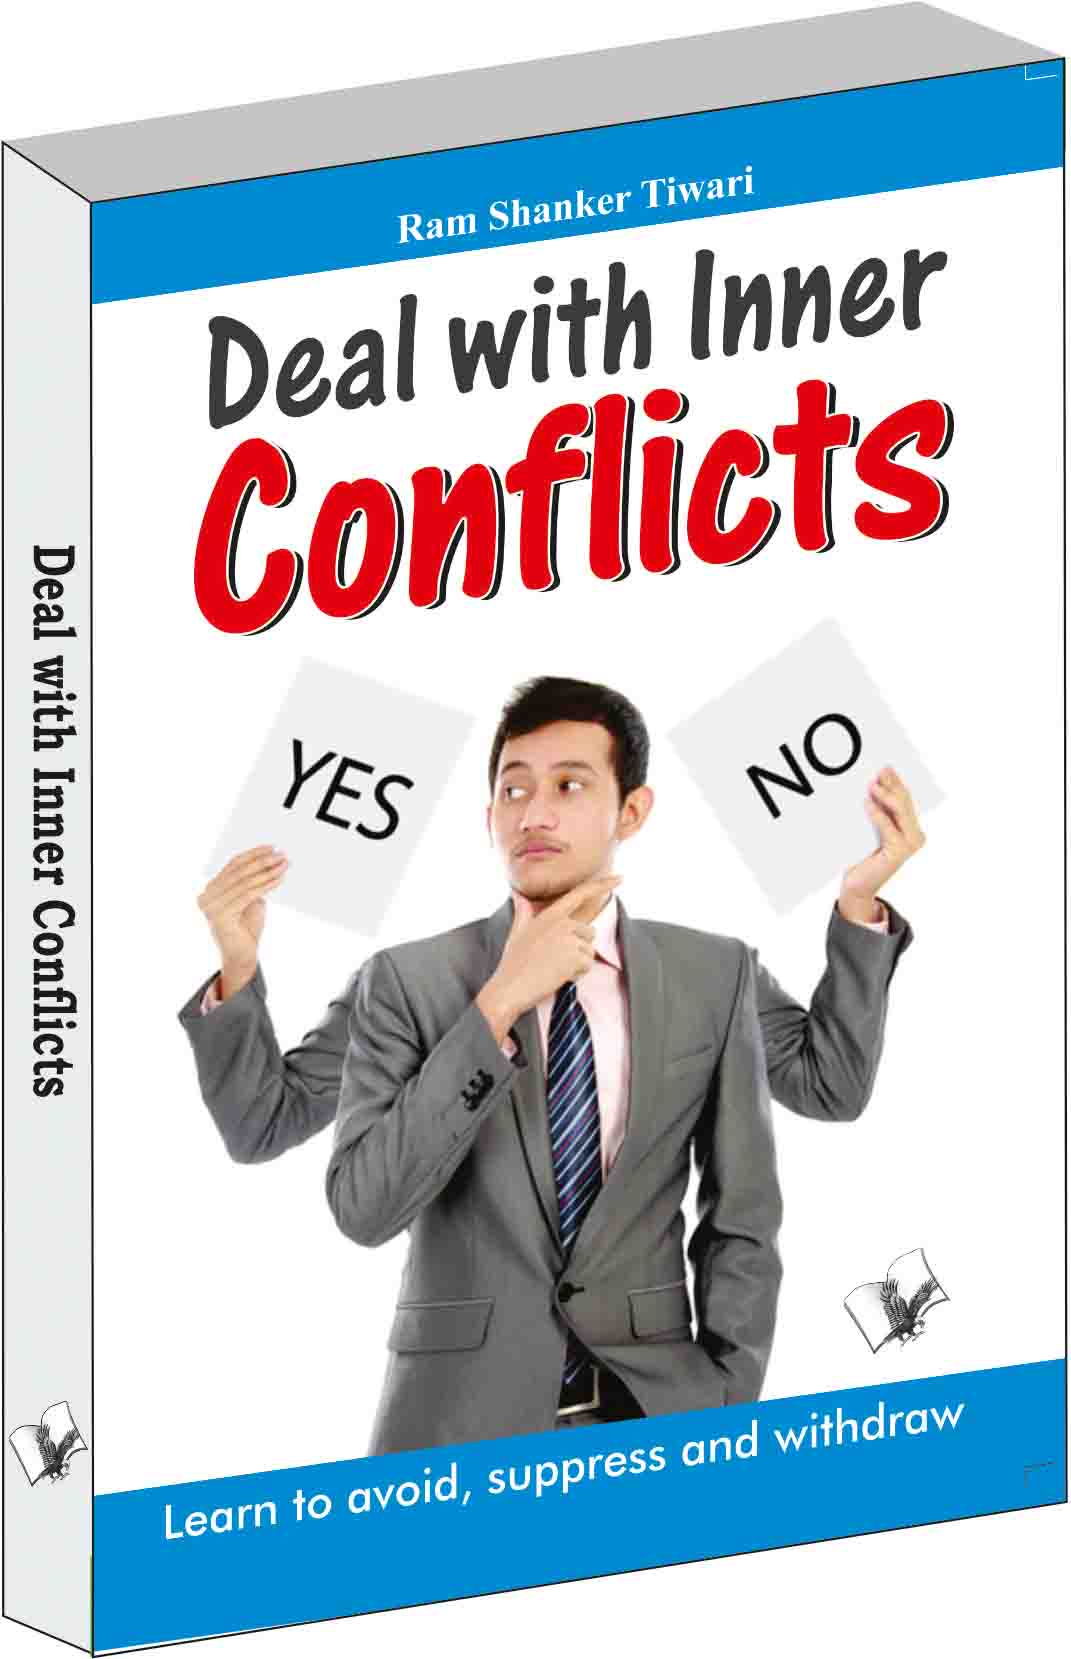 Deal with Inner Conflicts-Learn to avoid, suppress and withdraw